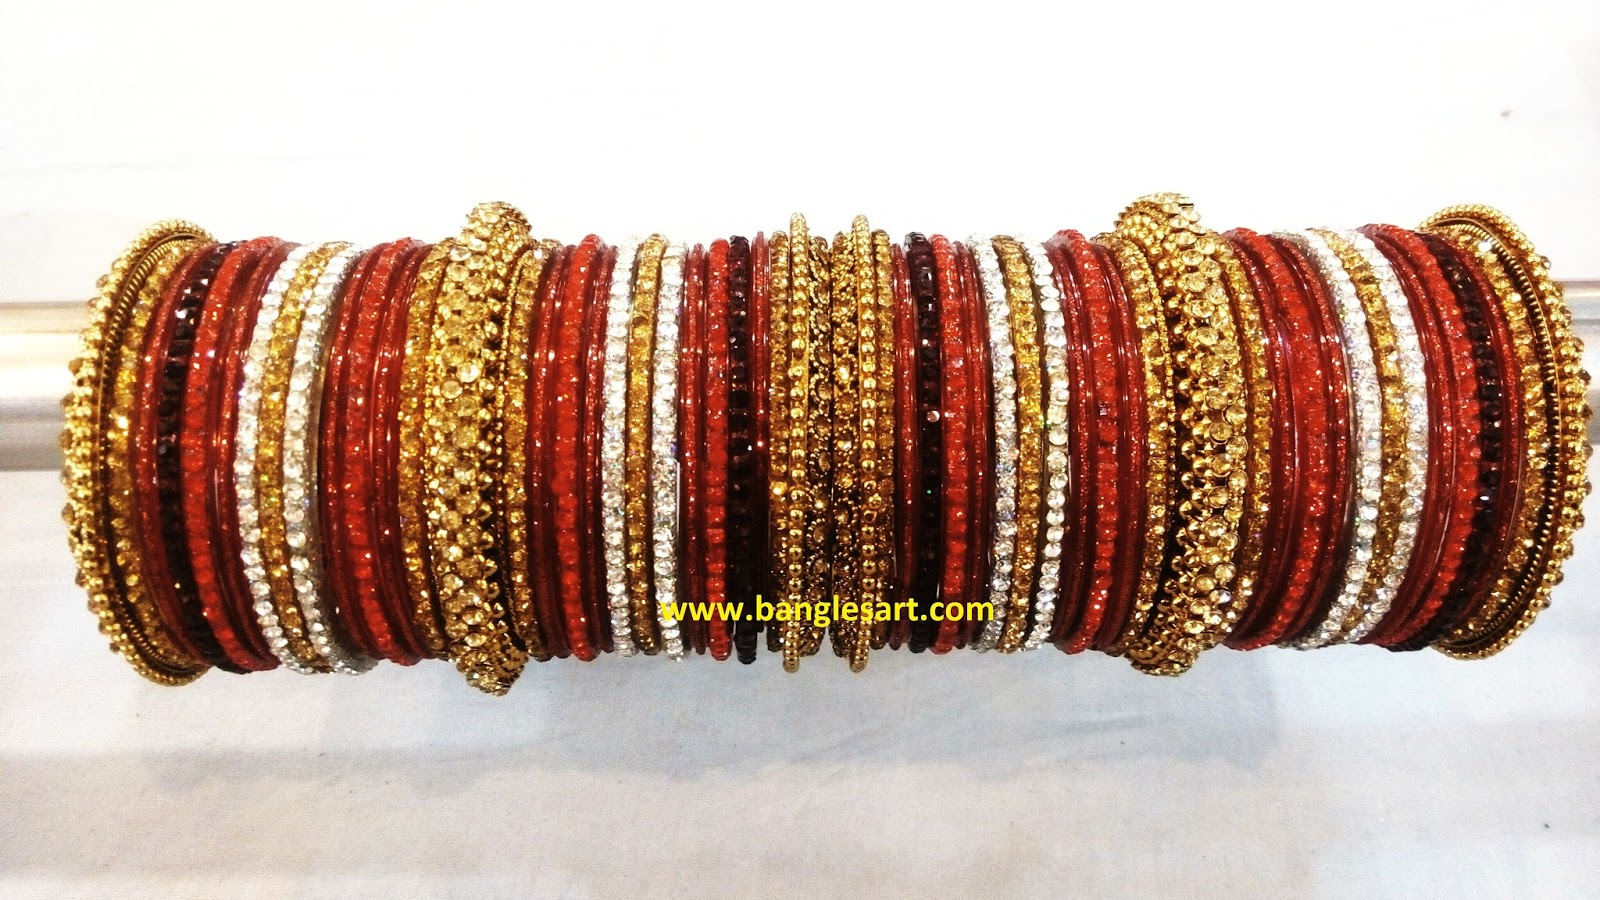 Details about   2.6 S Red Indian Glass Bangles Bollywood Belly Dance Bracelet Bridal Jewelry Set 